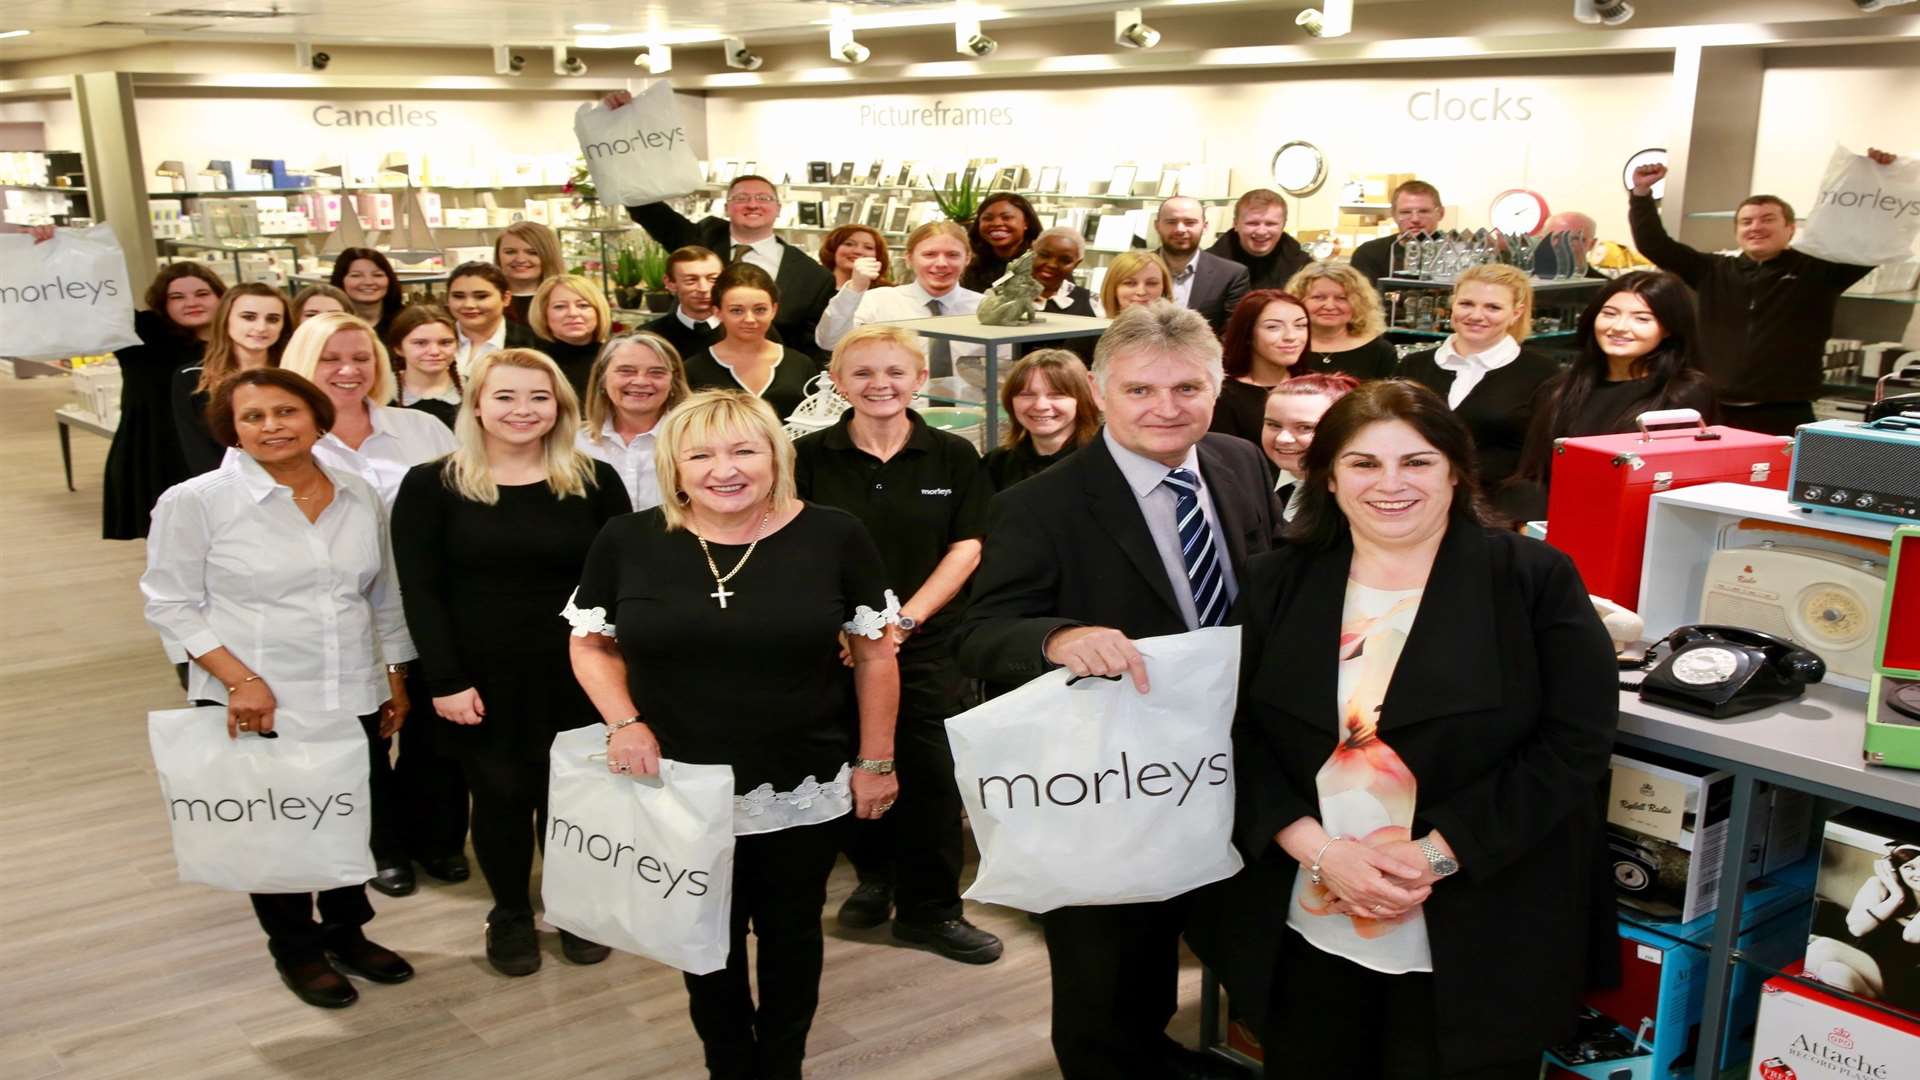 Broadway Shopping Centre general manager Peter Sedge with Morleys Bexleyheath manager Sophie Cassat and staff